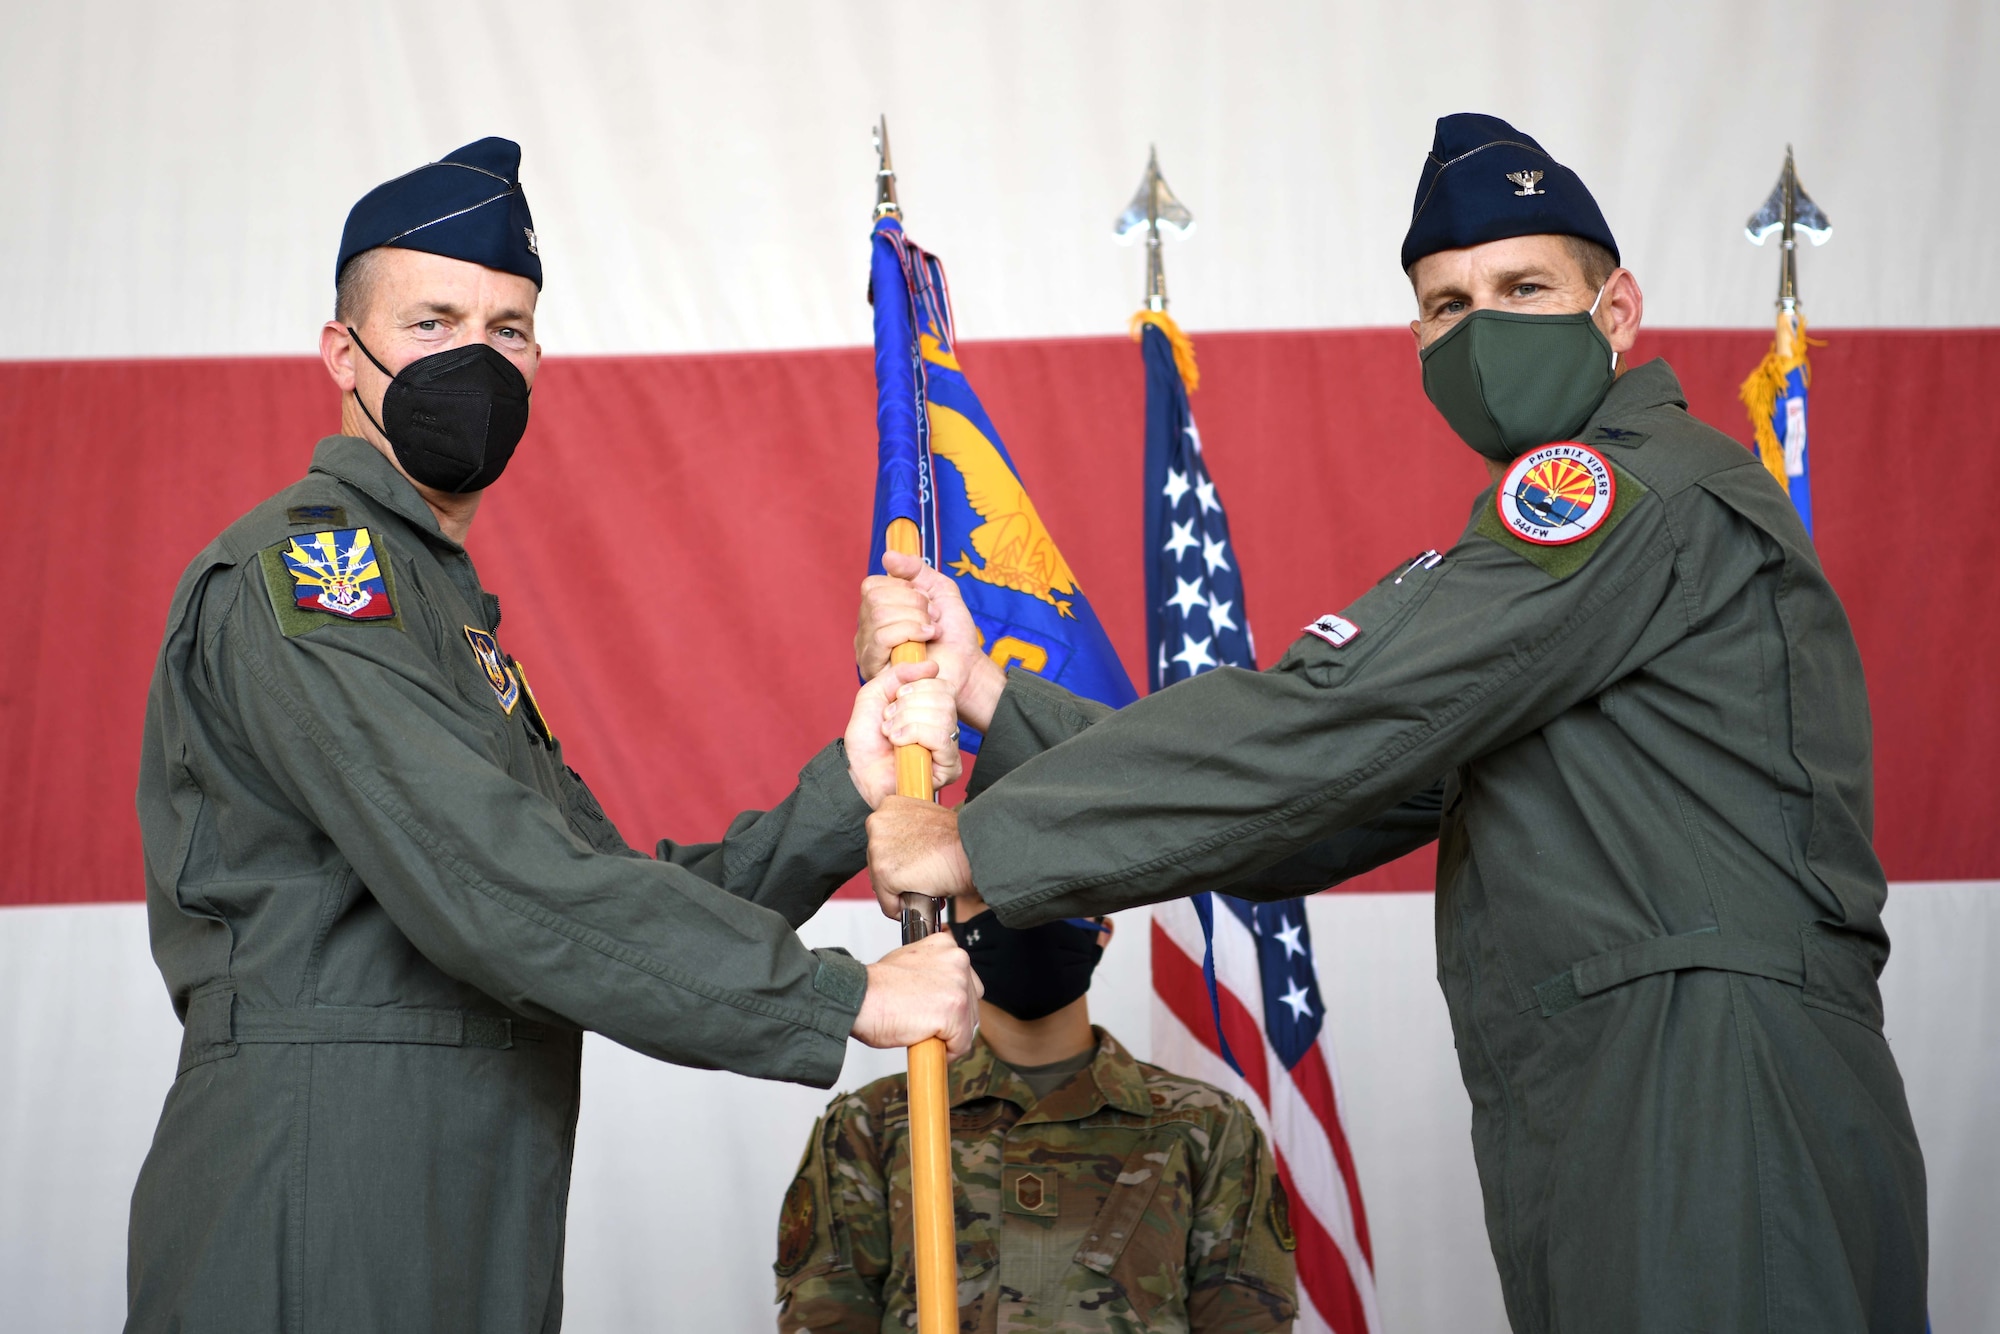 LUKE AIR FORCE BASE, ARIZ. – Reserve Citizen Airman Col. Mark Van Brunt, 944th Fighter Wing commander, presents Col. Brett Comer command of the 944th Operations Group during a change of command ceremony, August 6, 2021 at Luke Air Force Base, Arizona. Comer was the previous commander of the 301st Operations Support Squadron, 301st Fighter Wing, at Nellis Air Force Base, Neveda. (U.S. Air Force Photo/Tech. Sgt. Courtney Richardson)